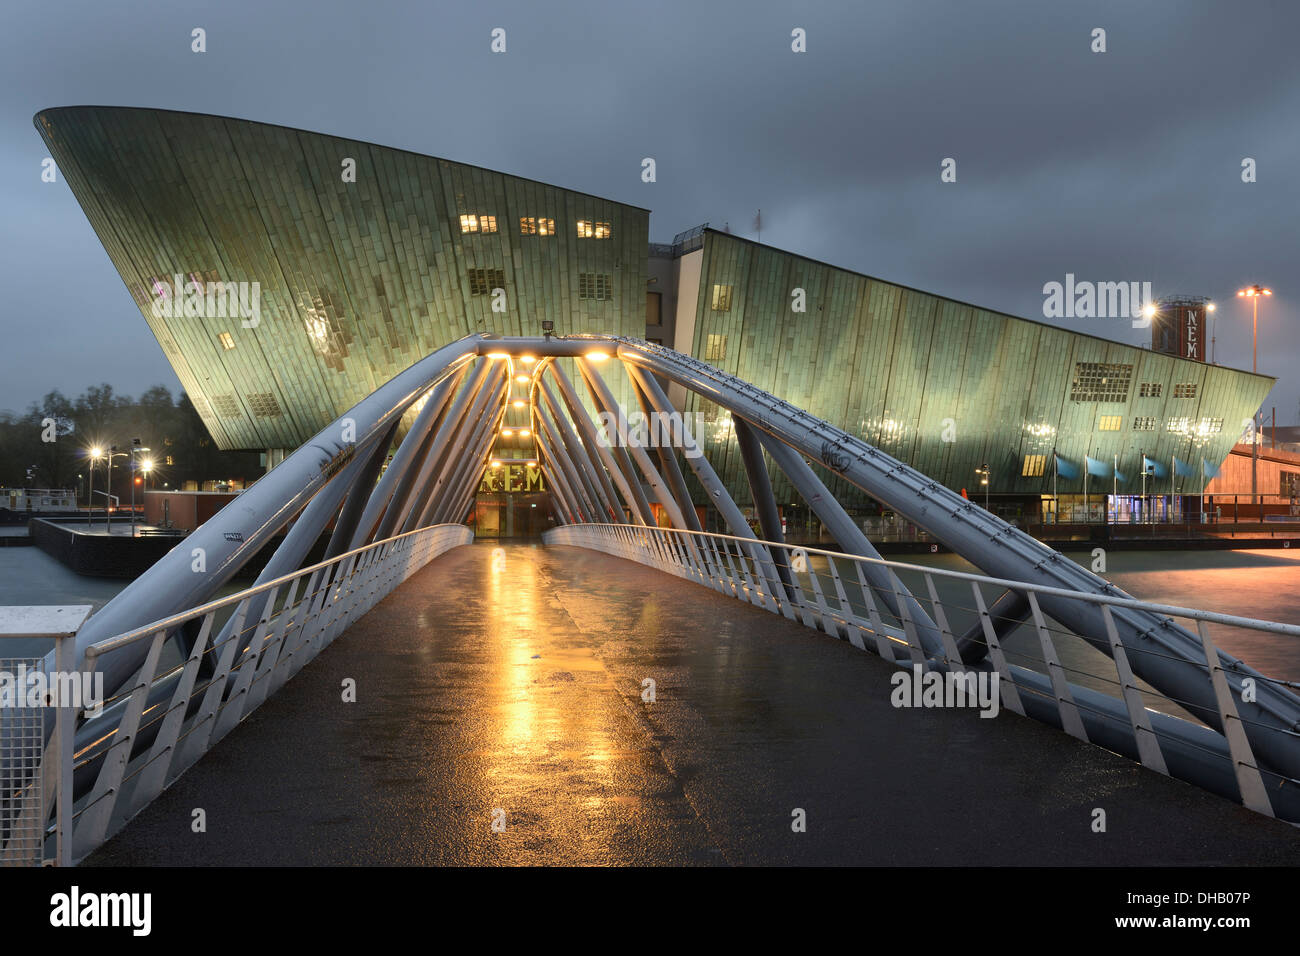 The NEMO science centre lit at night in Amsterdam, The Netherlands. Stock Photo